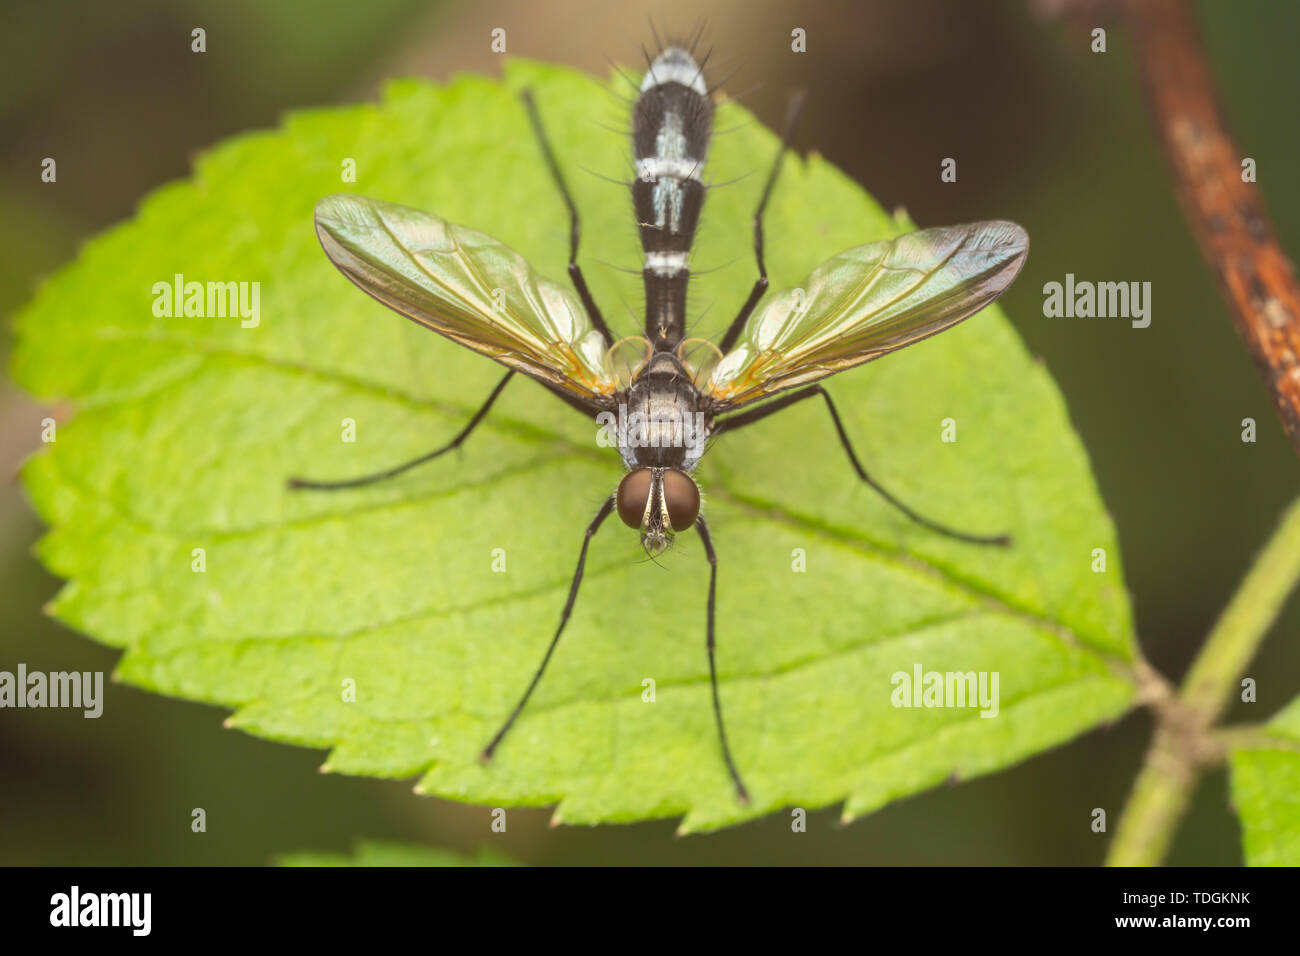 Parasitic Fly (Cordyligaster septentrionalis) Stock Photo